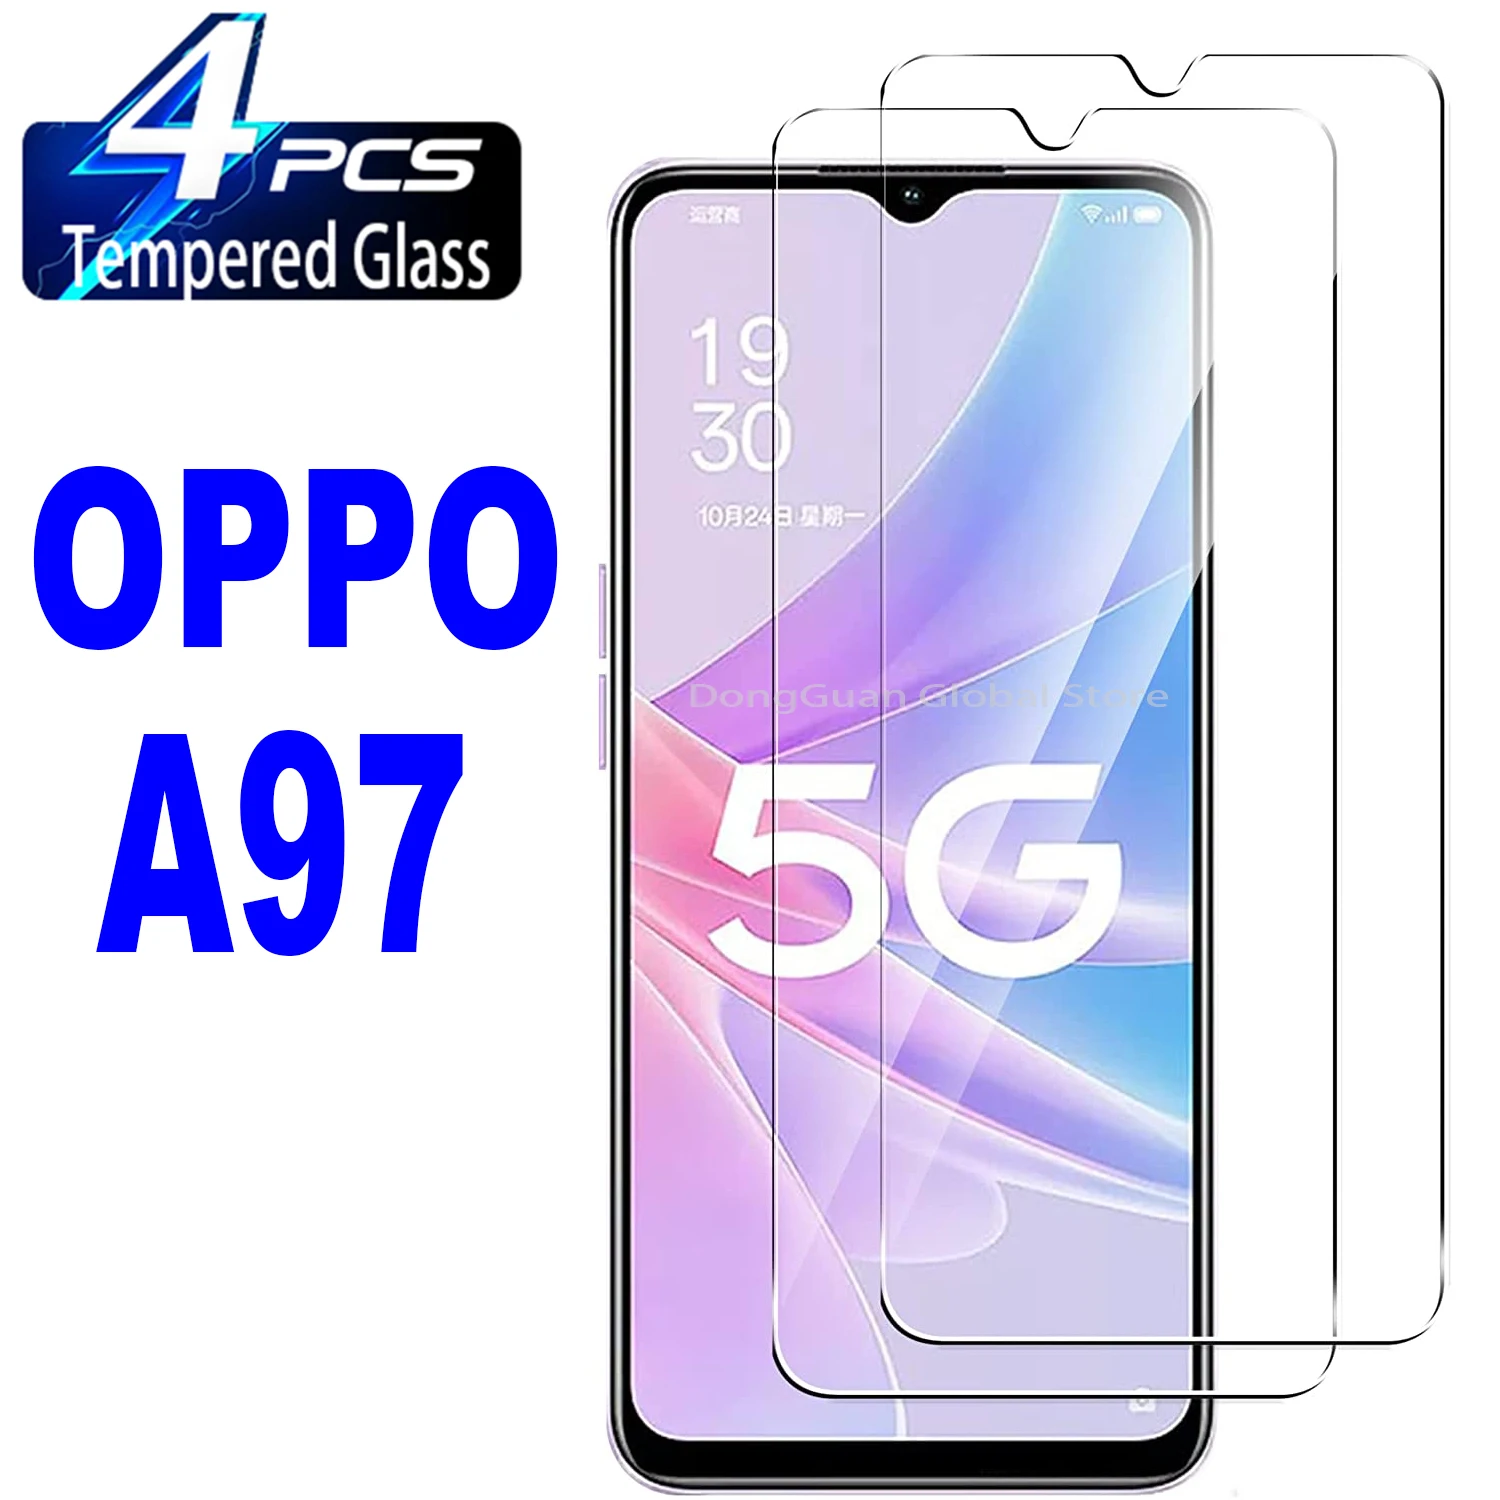 2/4Pcs Tempered Glass For OPPO A97 Screen Protector Glass Film 2 4pcs tempered glass for huawei p smart 2020 screen protector glass film